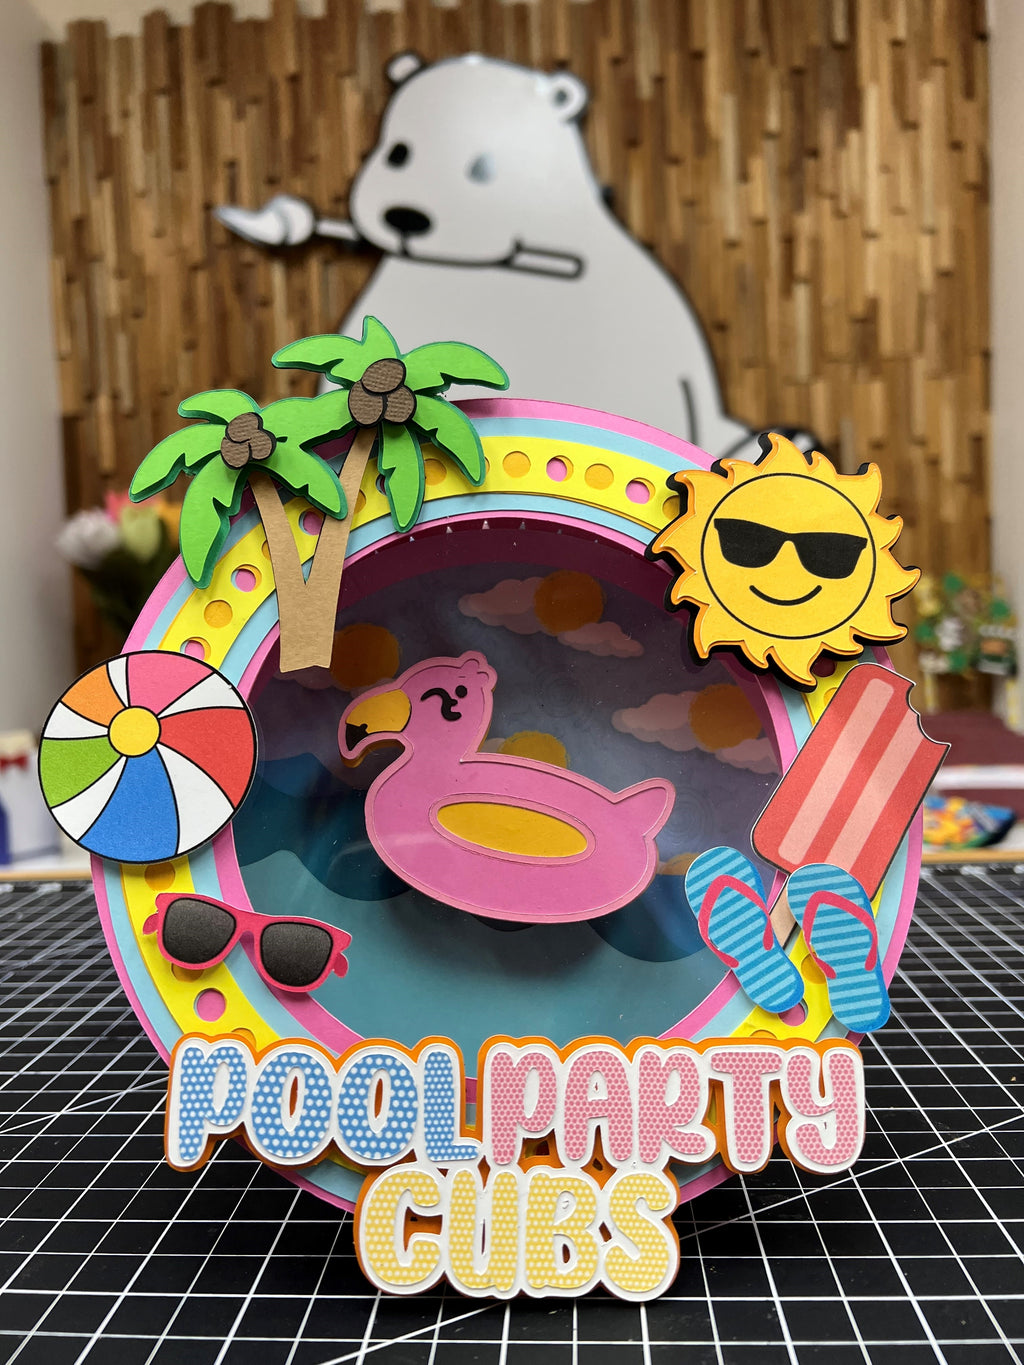 Pool Party Cubs - Cake Topper from @SofisCorner_Crafts